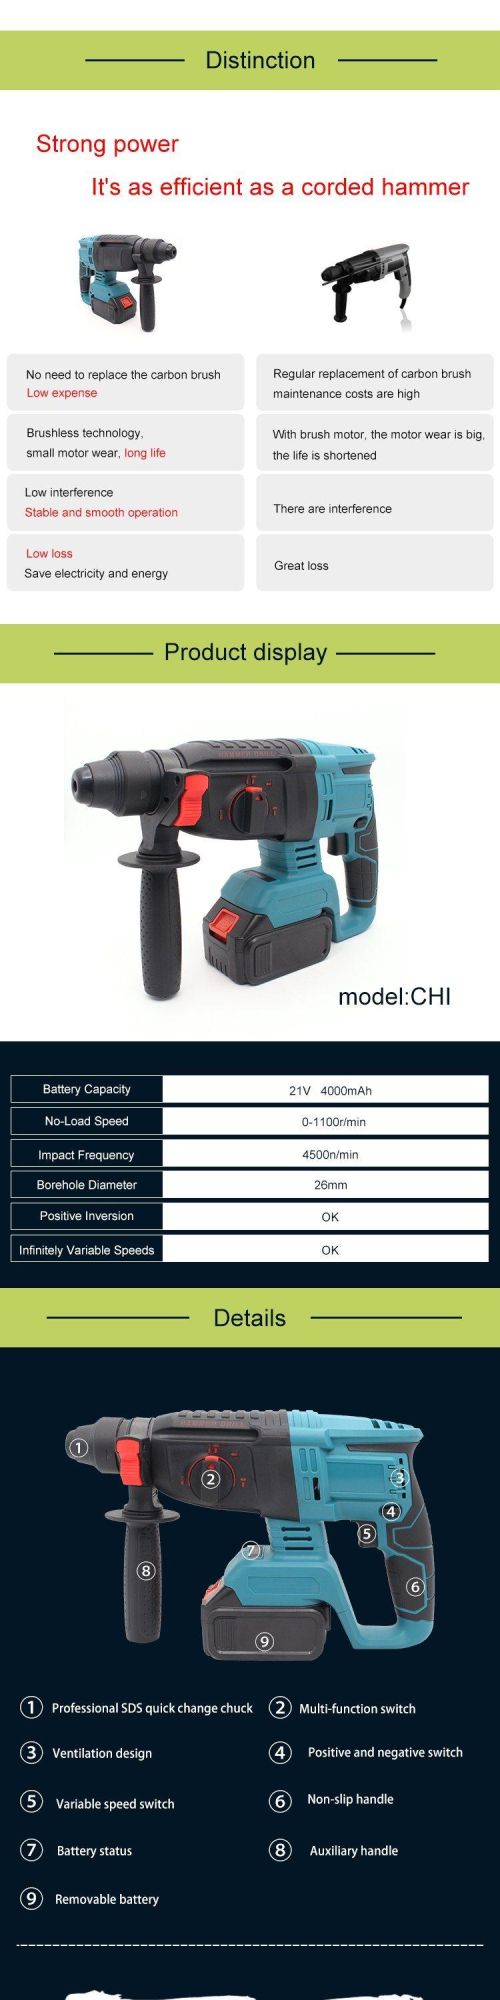 Best Quality Rotary Workzone 26mmhammer Drill Cordless Set